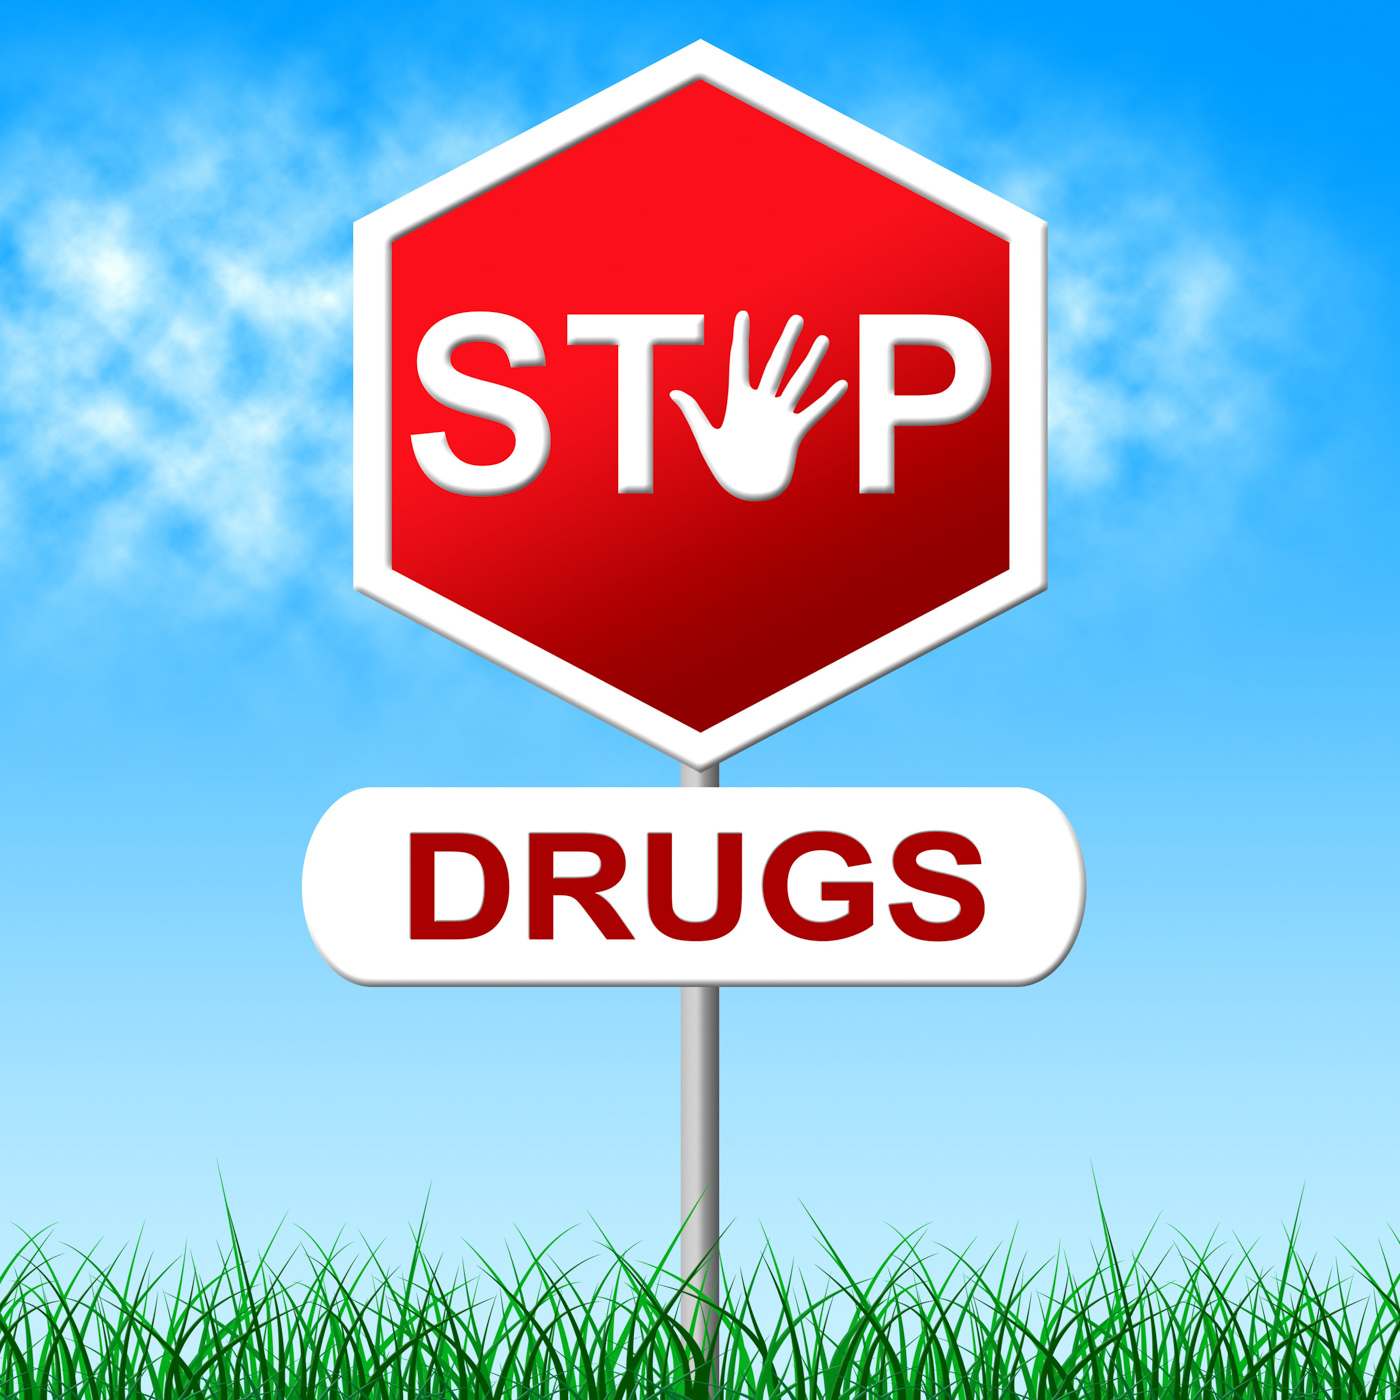 Stop drugs represents warning sign and cocaine photo